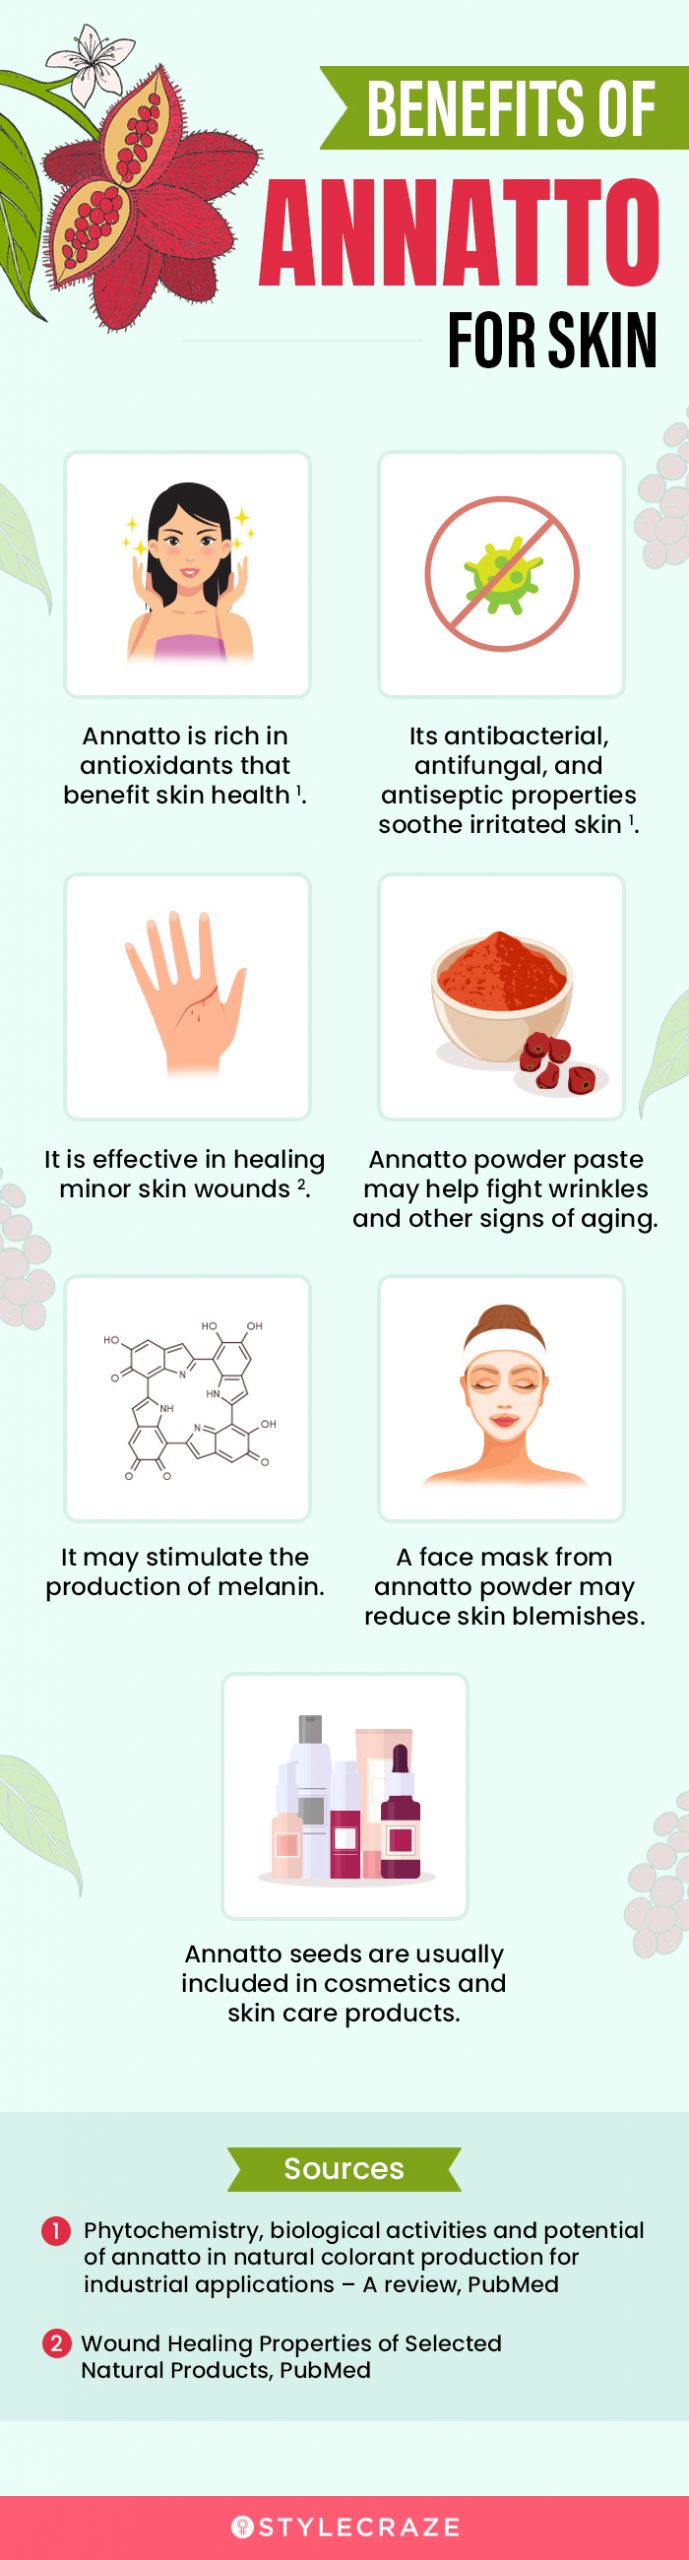 benefitss of annatto for skin [infographic]